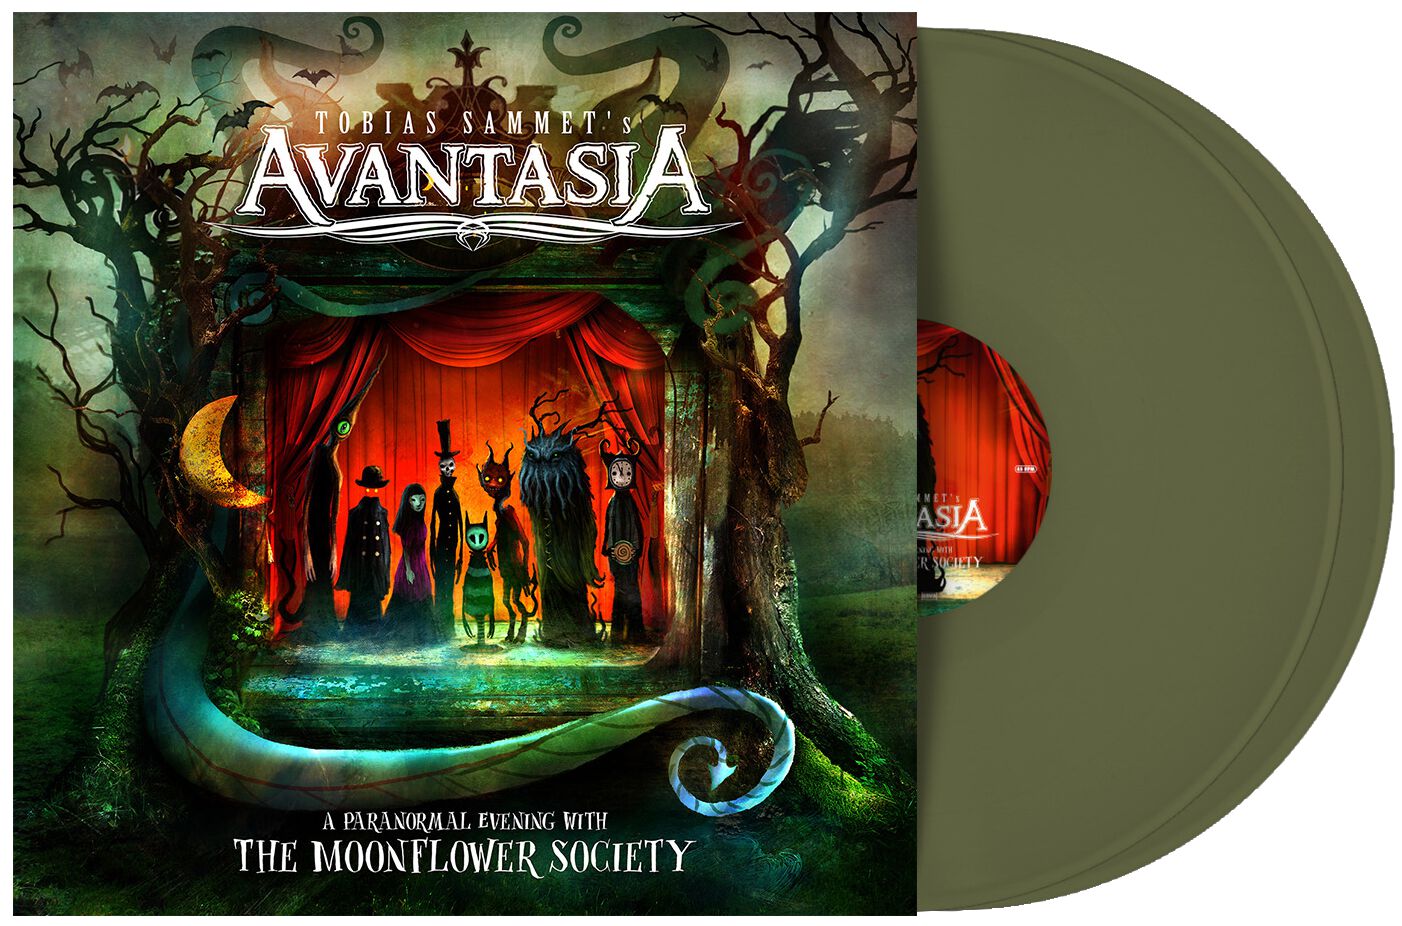 Avantasia A paranormal evening with the moonflower society LP farbig